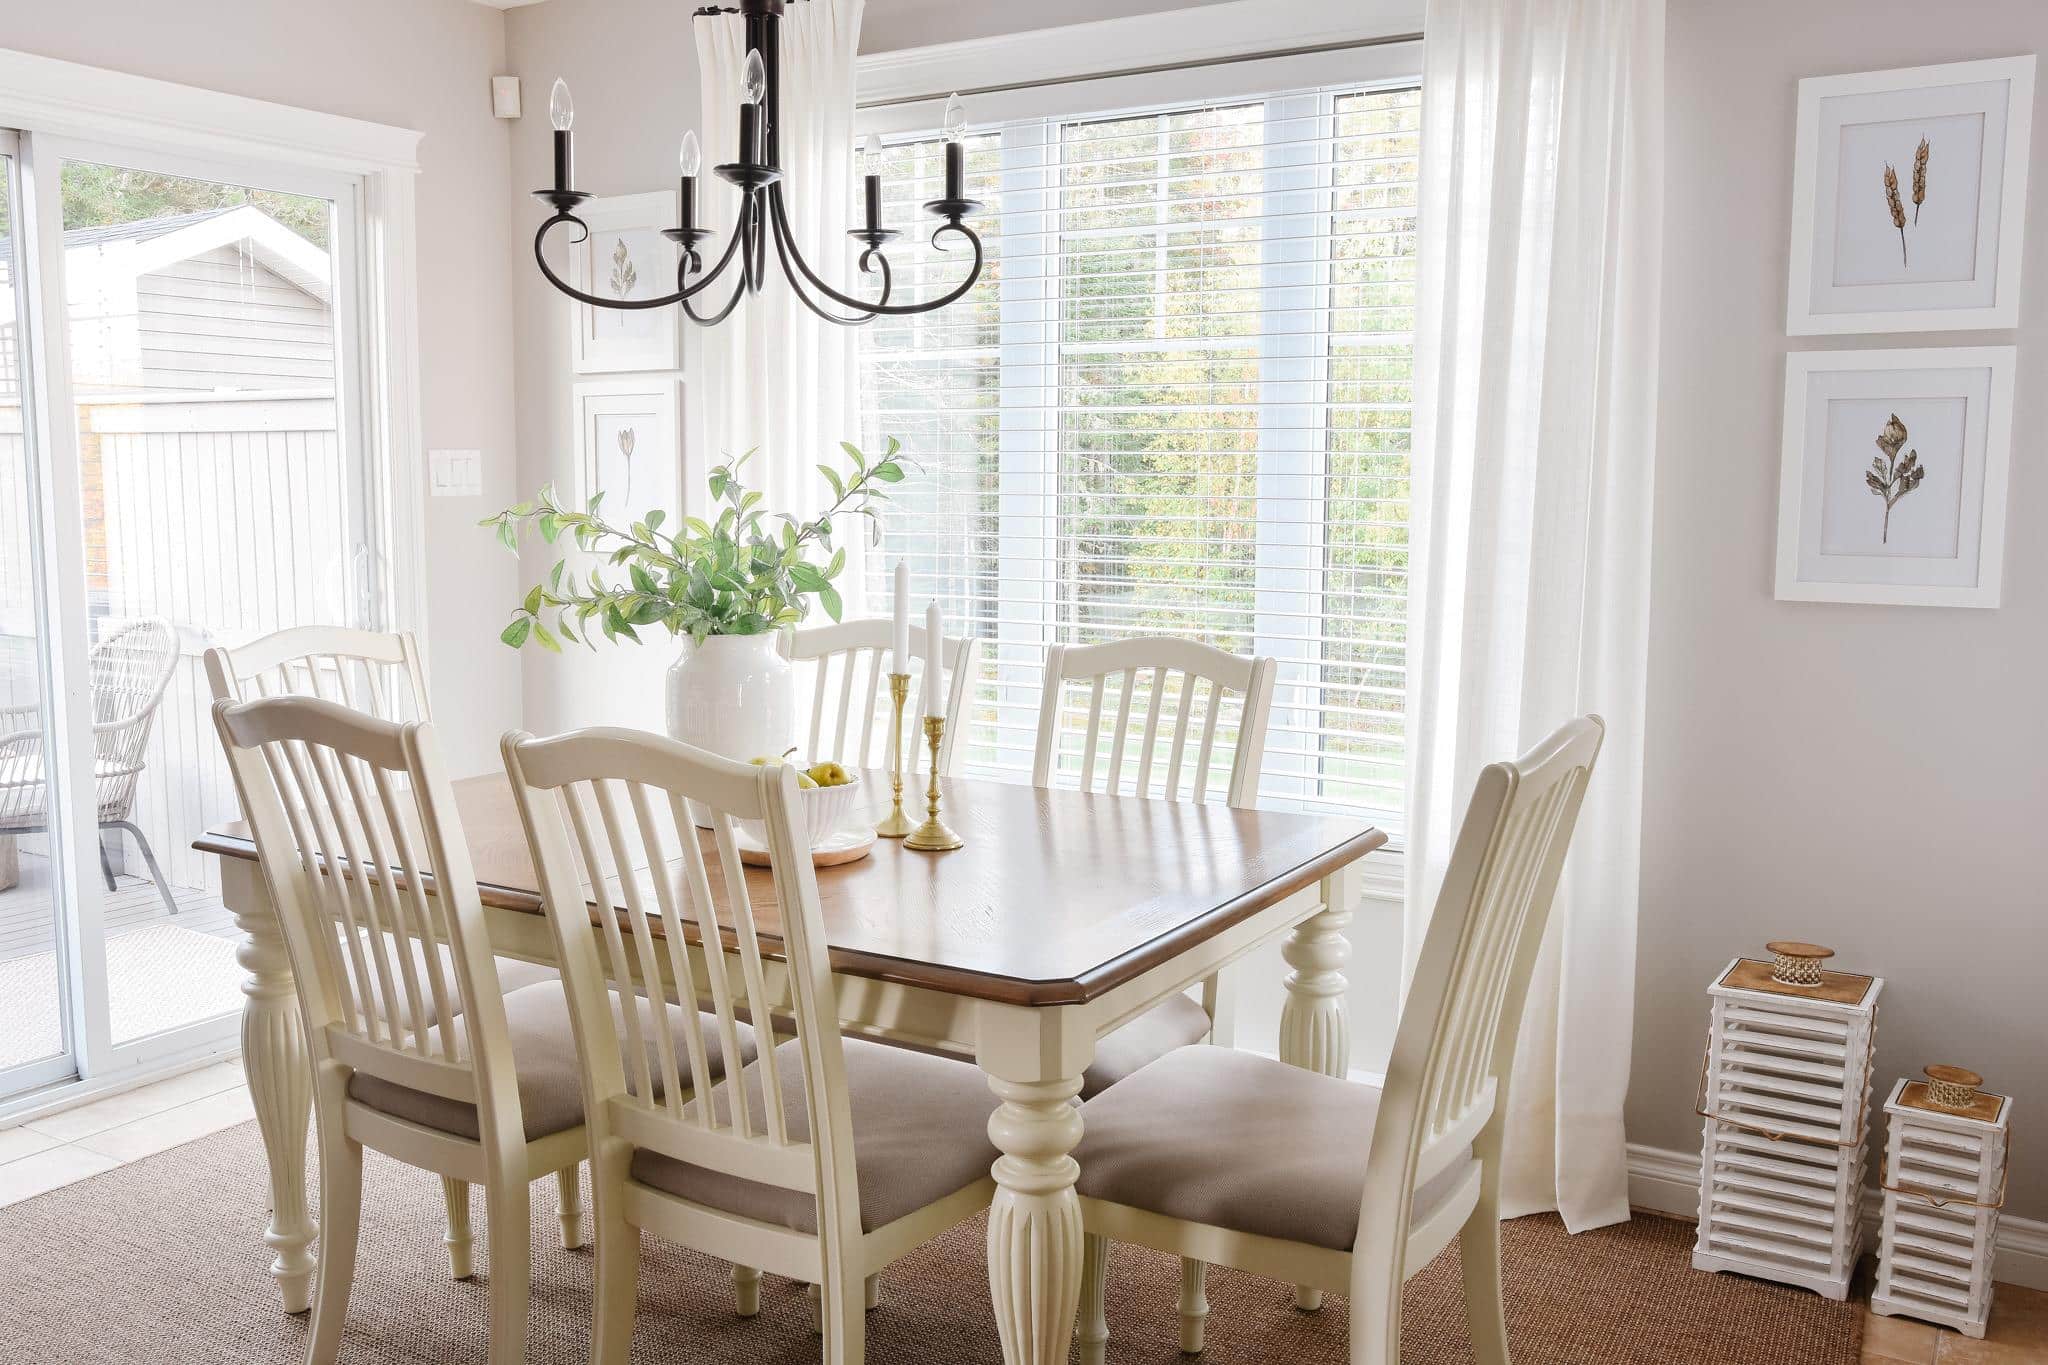 Transform Your Small Dining Room: A Before & After Makeover